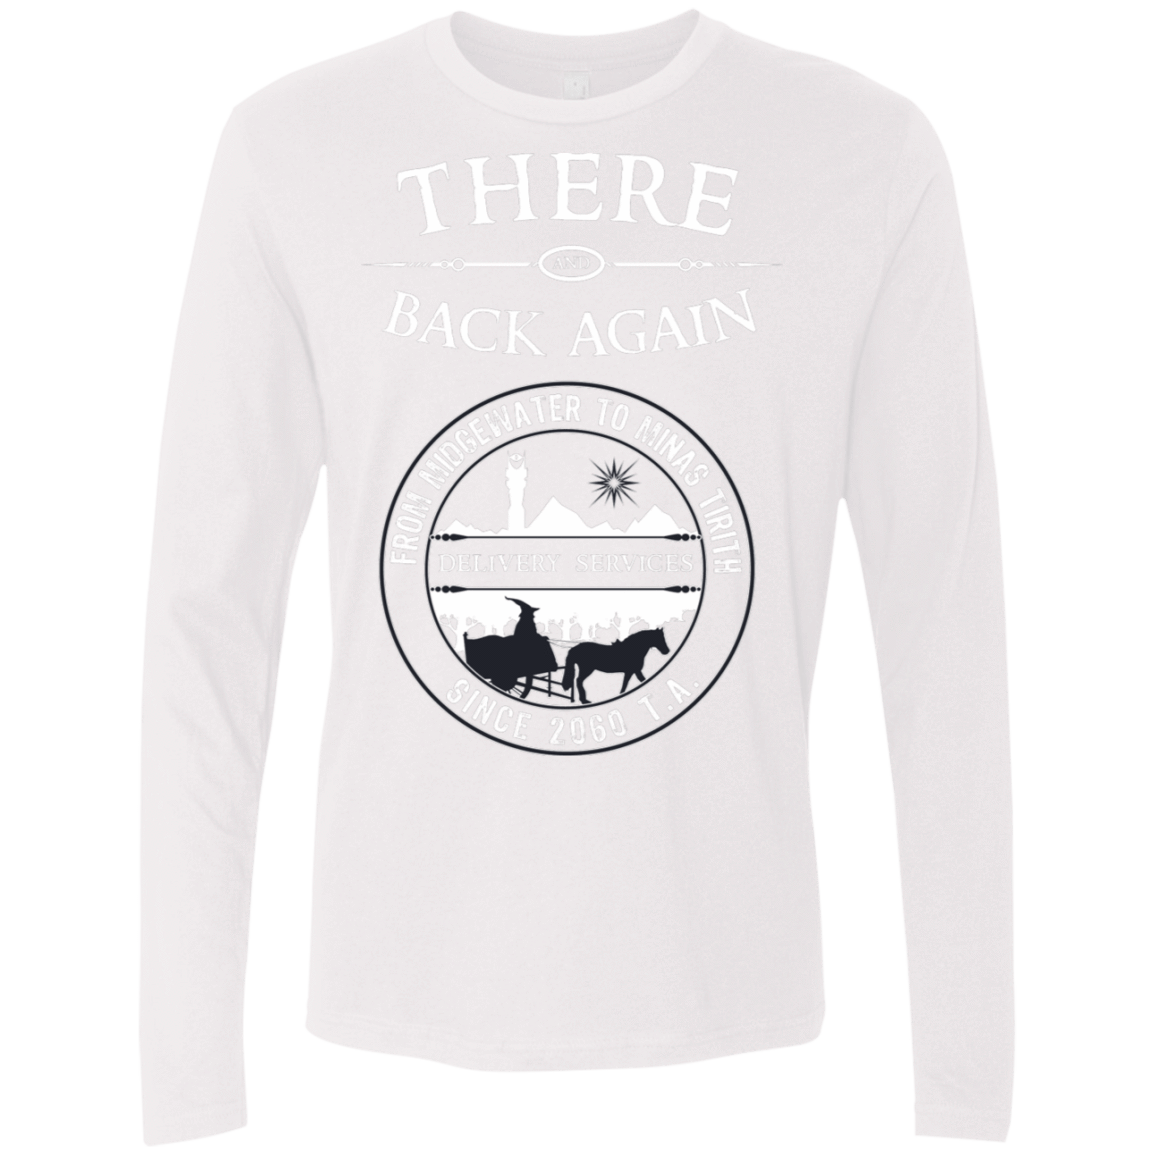 T-Shirts White / S There and Back Again Men's Premium Long Sleeve